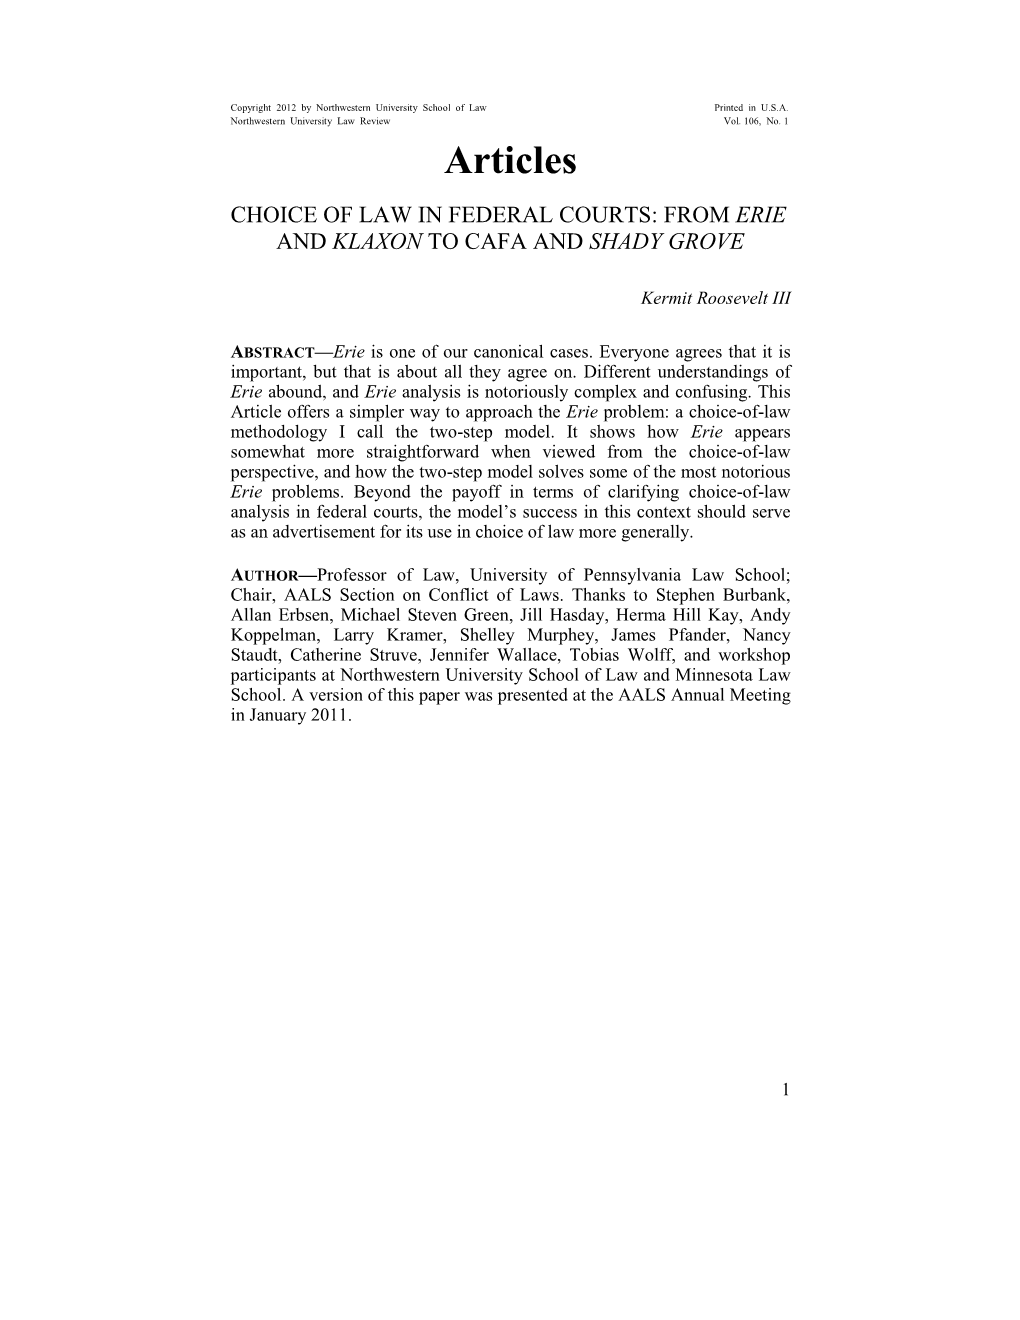 Choice of Law in Federal Courts: from Erie and Klaxo� to Cafa and Shady Grove